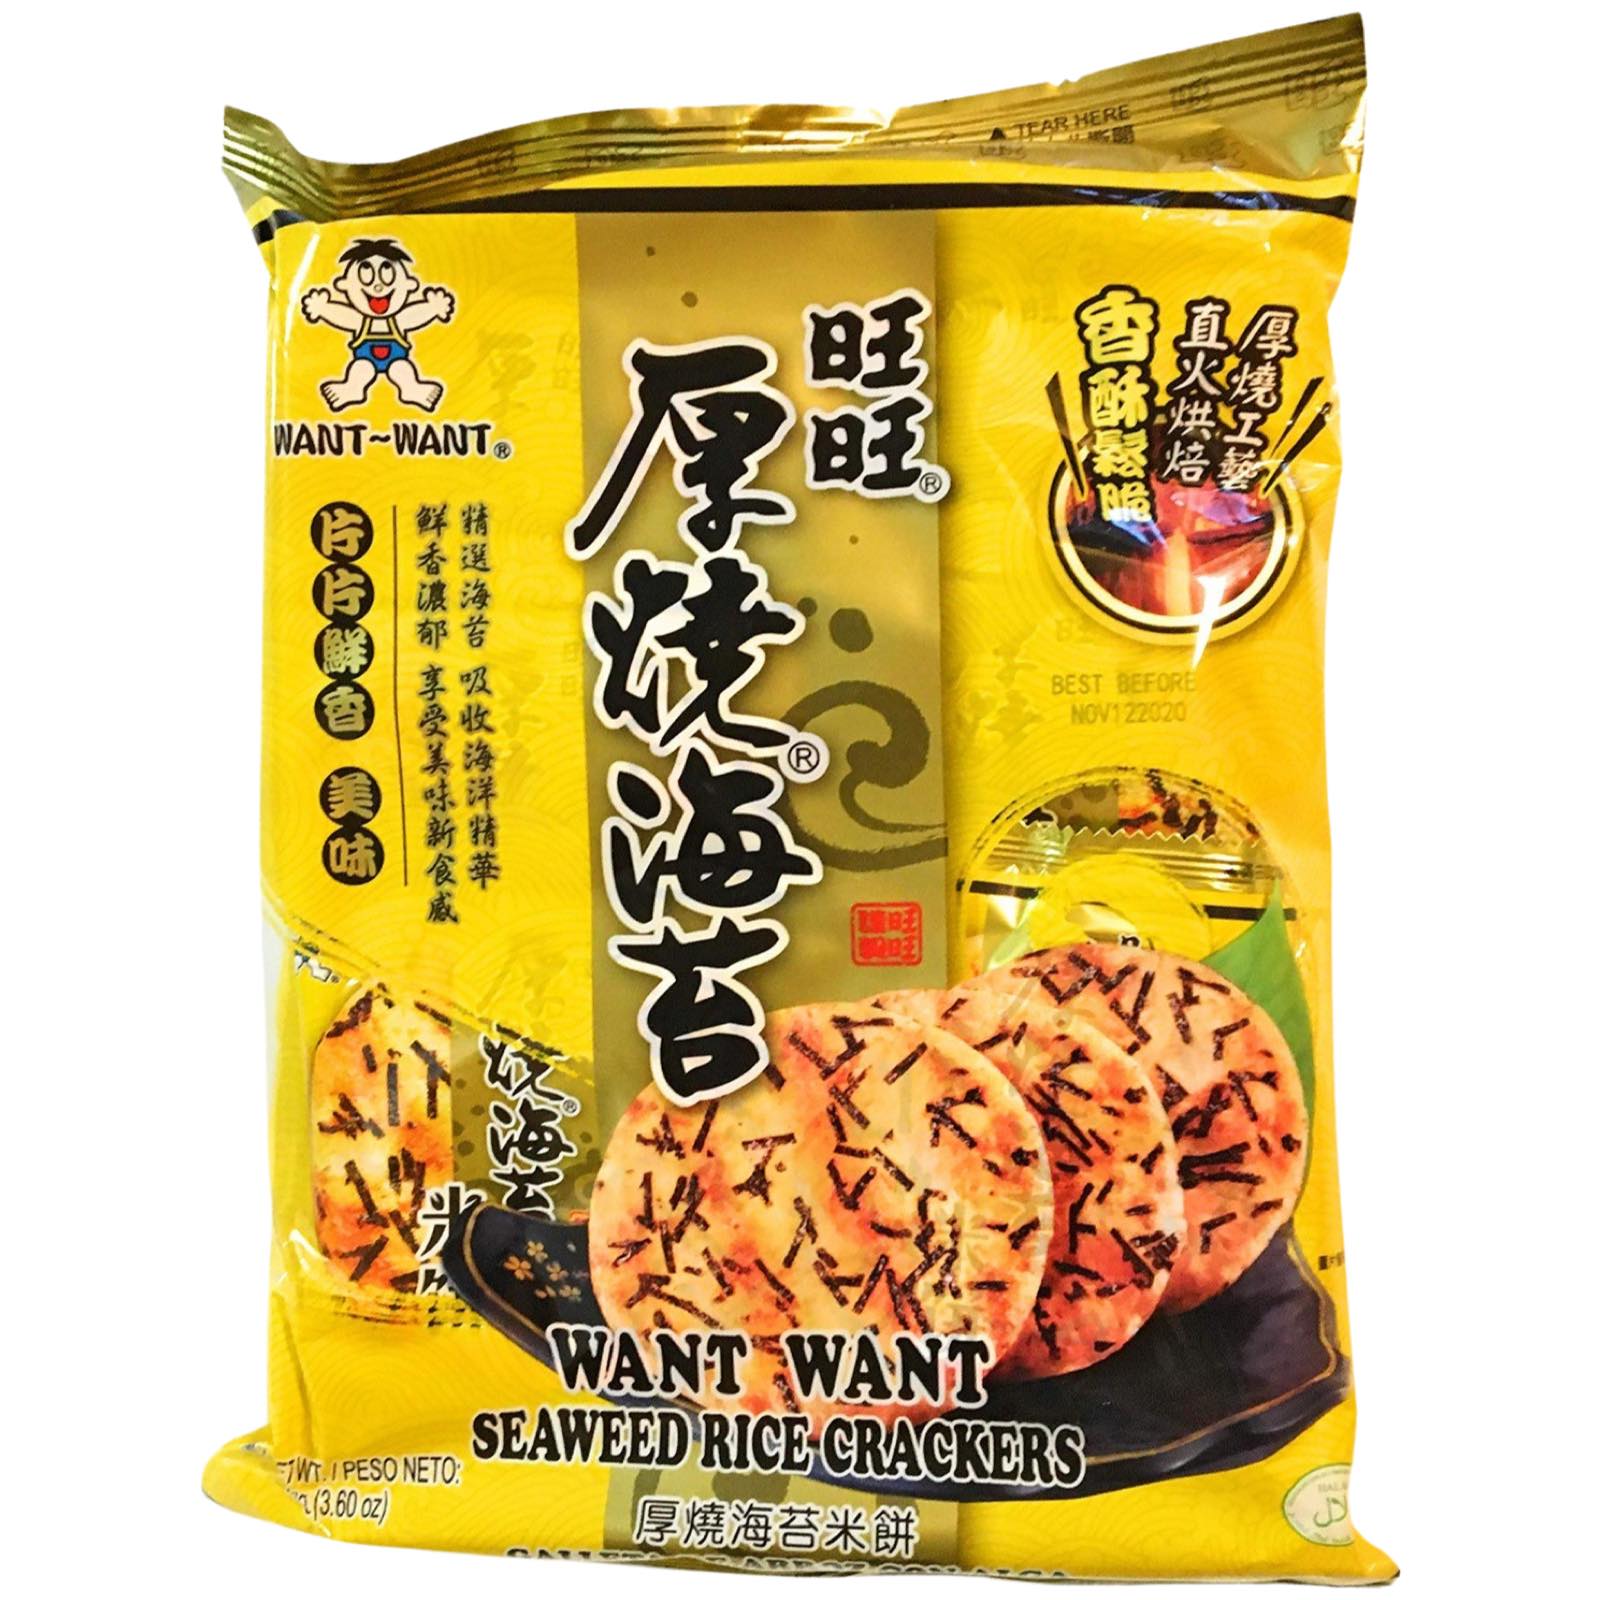 Want Want - Seaweed Rice Crackers - 3.6 OZ